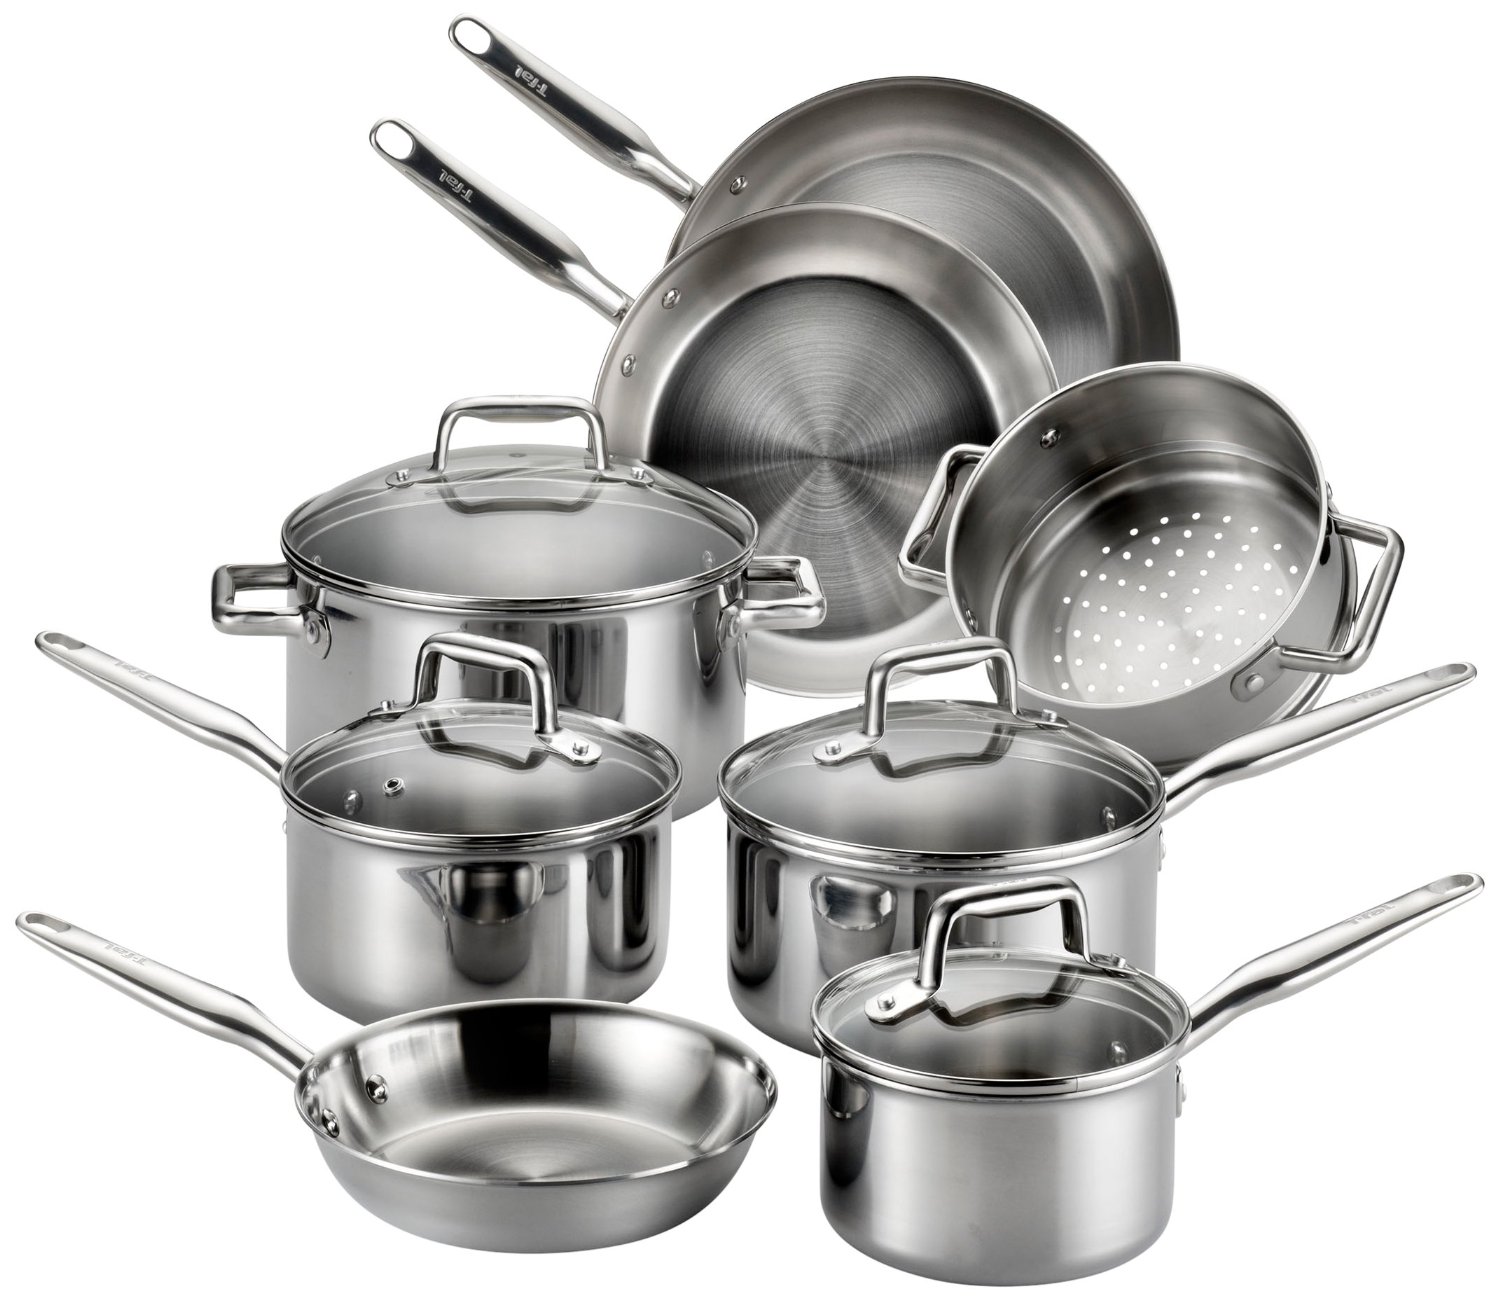 T-fal E469SC Tri-ply Stainless Steel Multi-clad Dishwasher Safe Oven Safe Cookware Set, 12-Piece, Silver